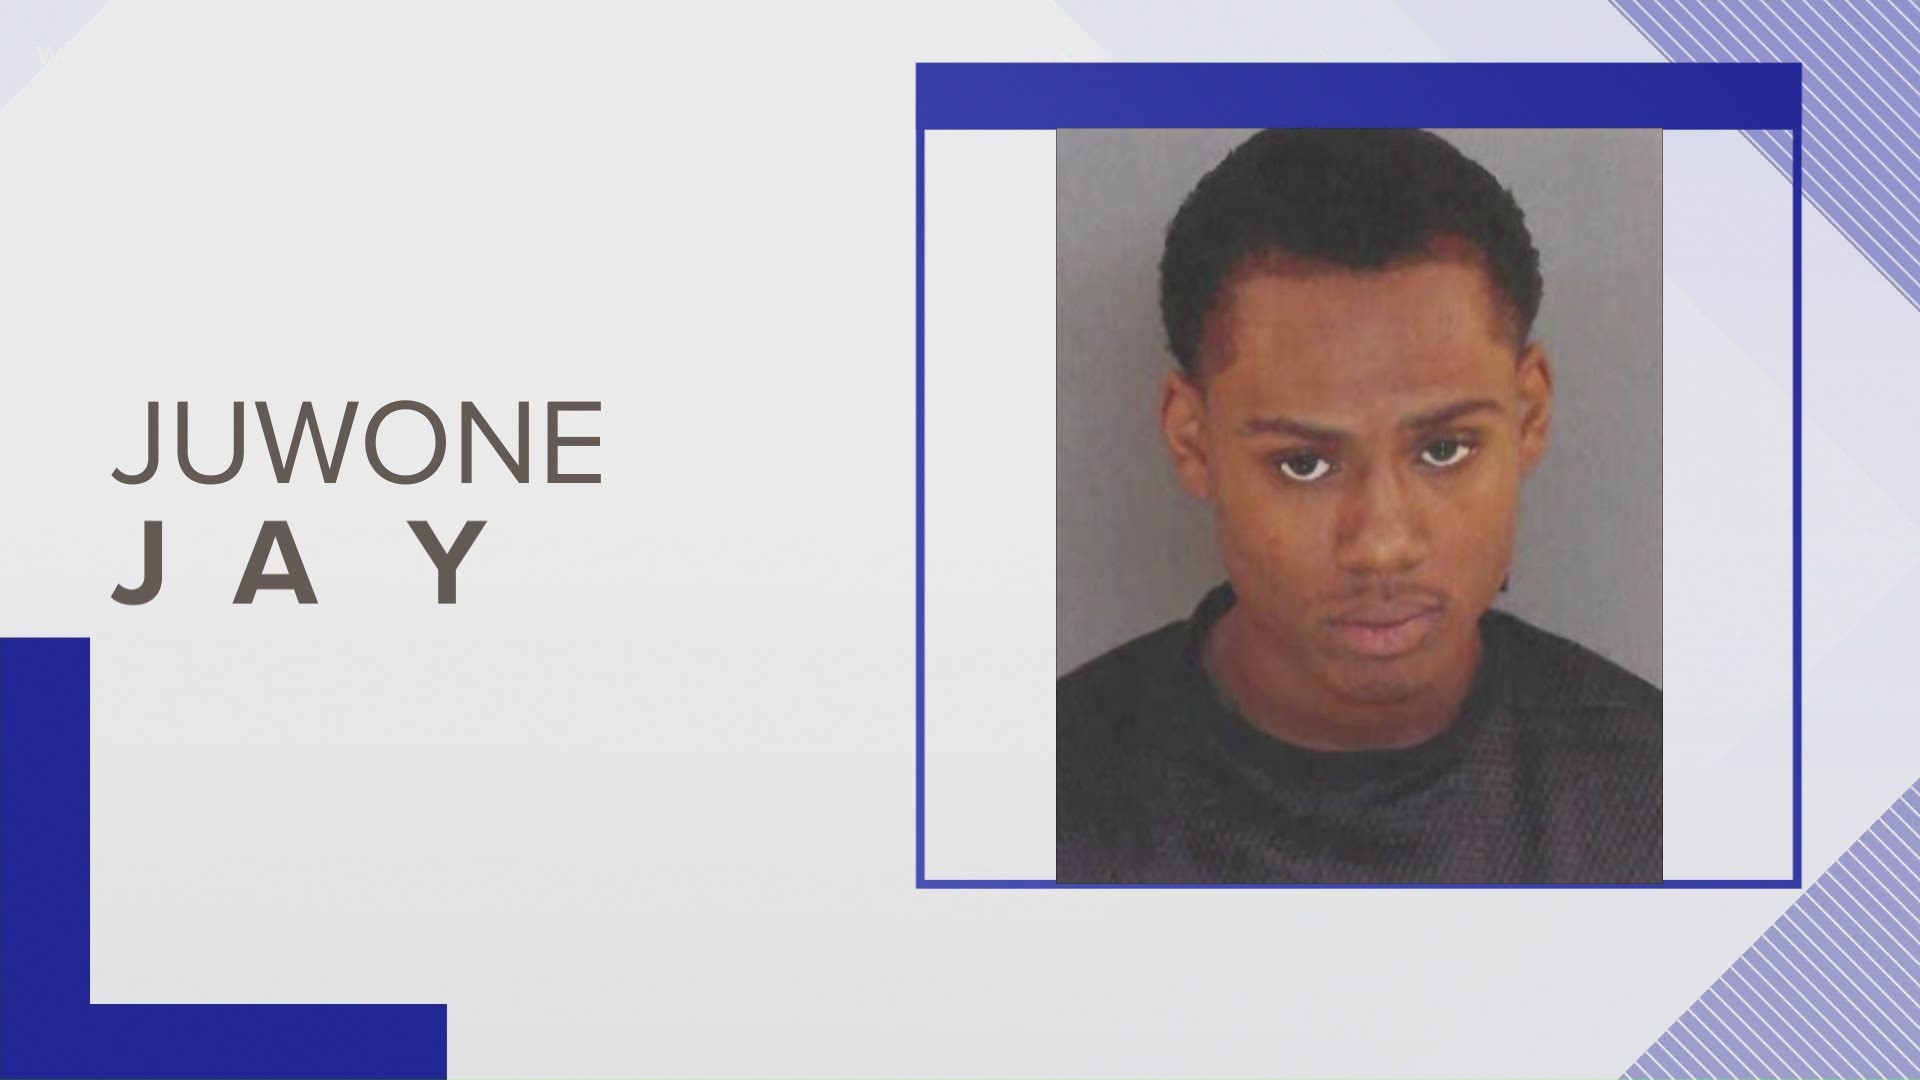 Deputies say Juwone D'Angelo Kelley Jay, 24, of Sumter is wanted for murder after the fatal shooting of 20-year-old Kalieah Green on Hickory Road on May 25.